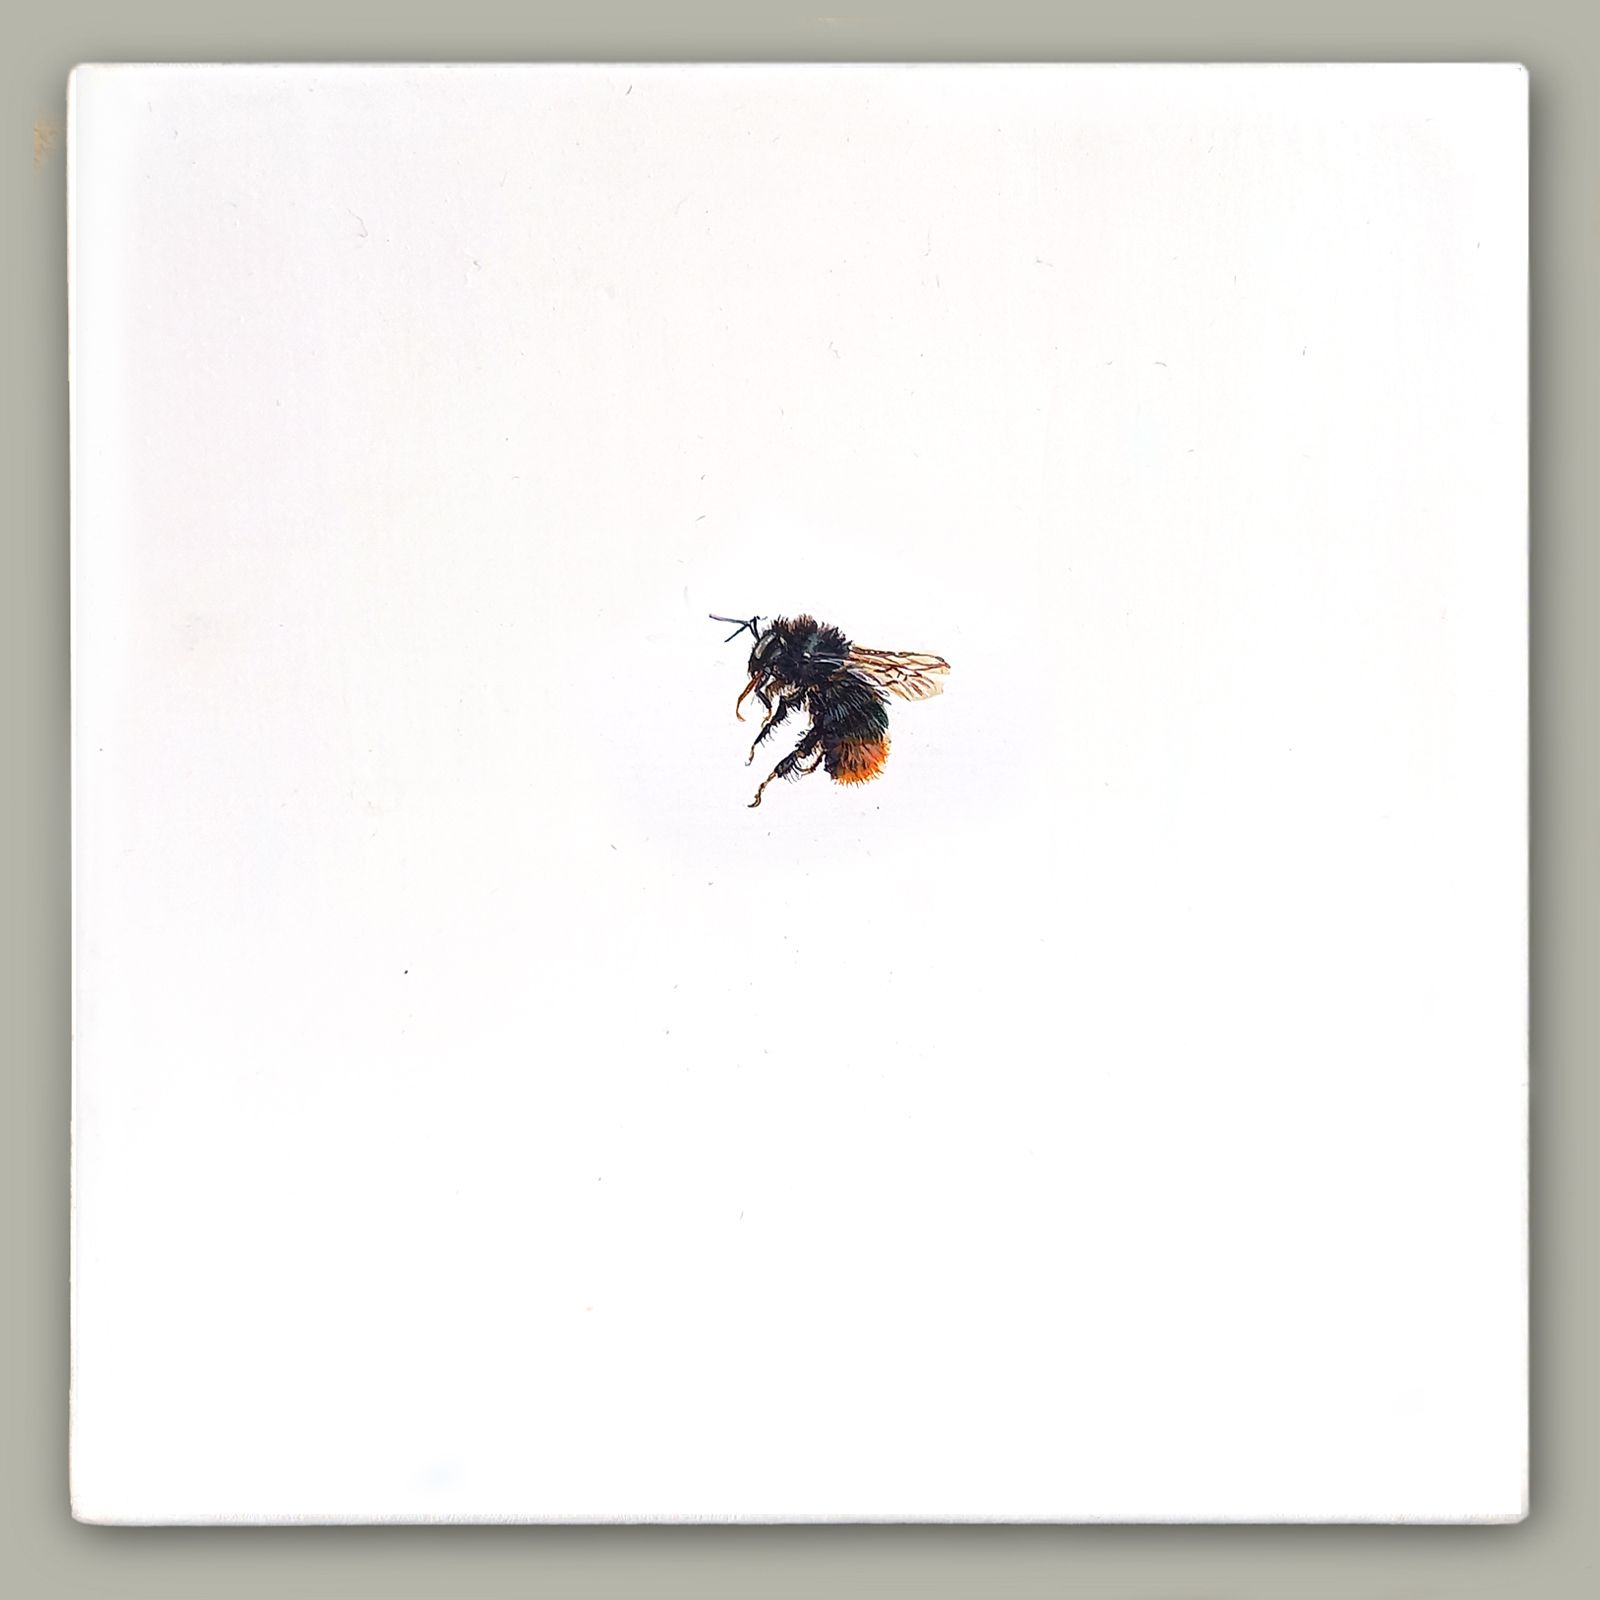 One Bee Left: Red-tailed Bumblebee by Hazel Mountford